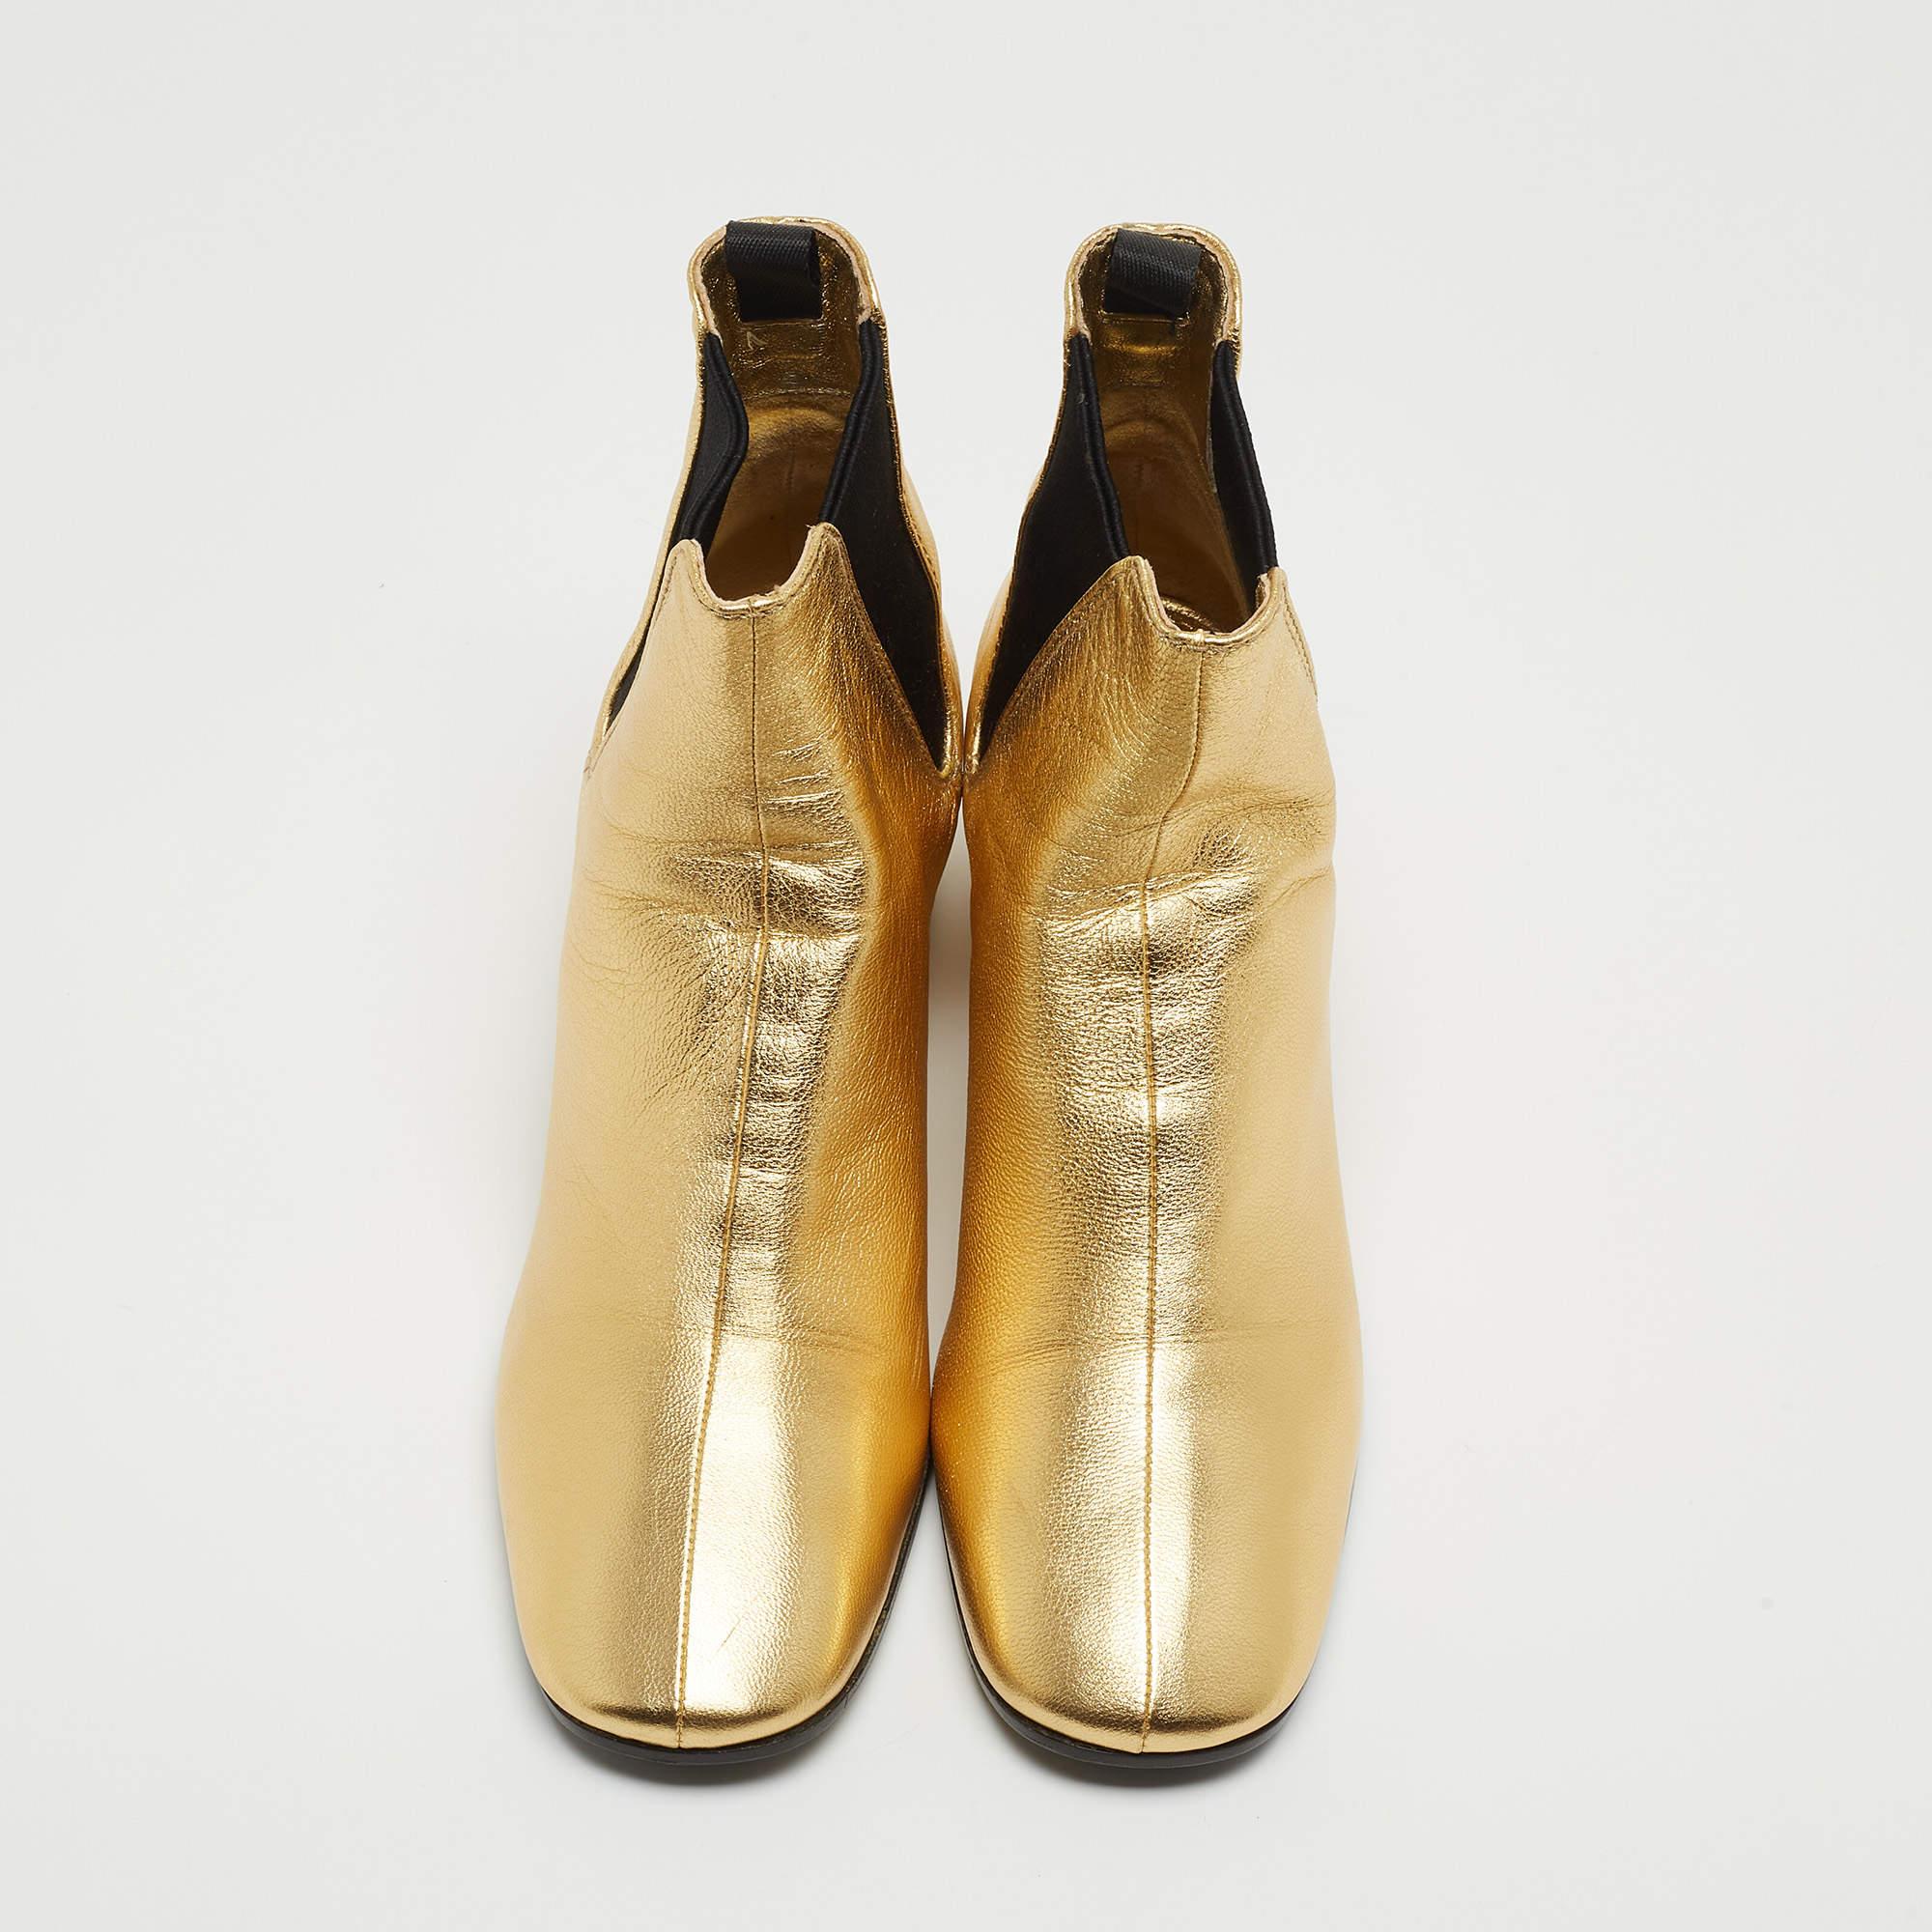 Prada Metallic Gold Leather Ankle Boots Size 37 5